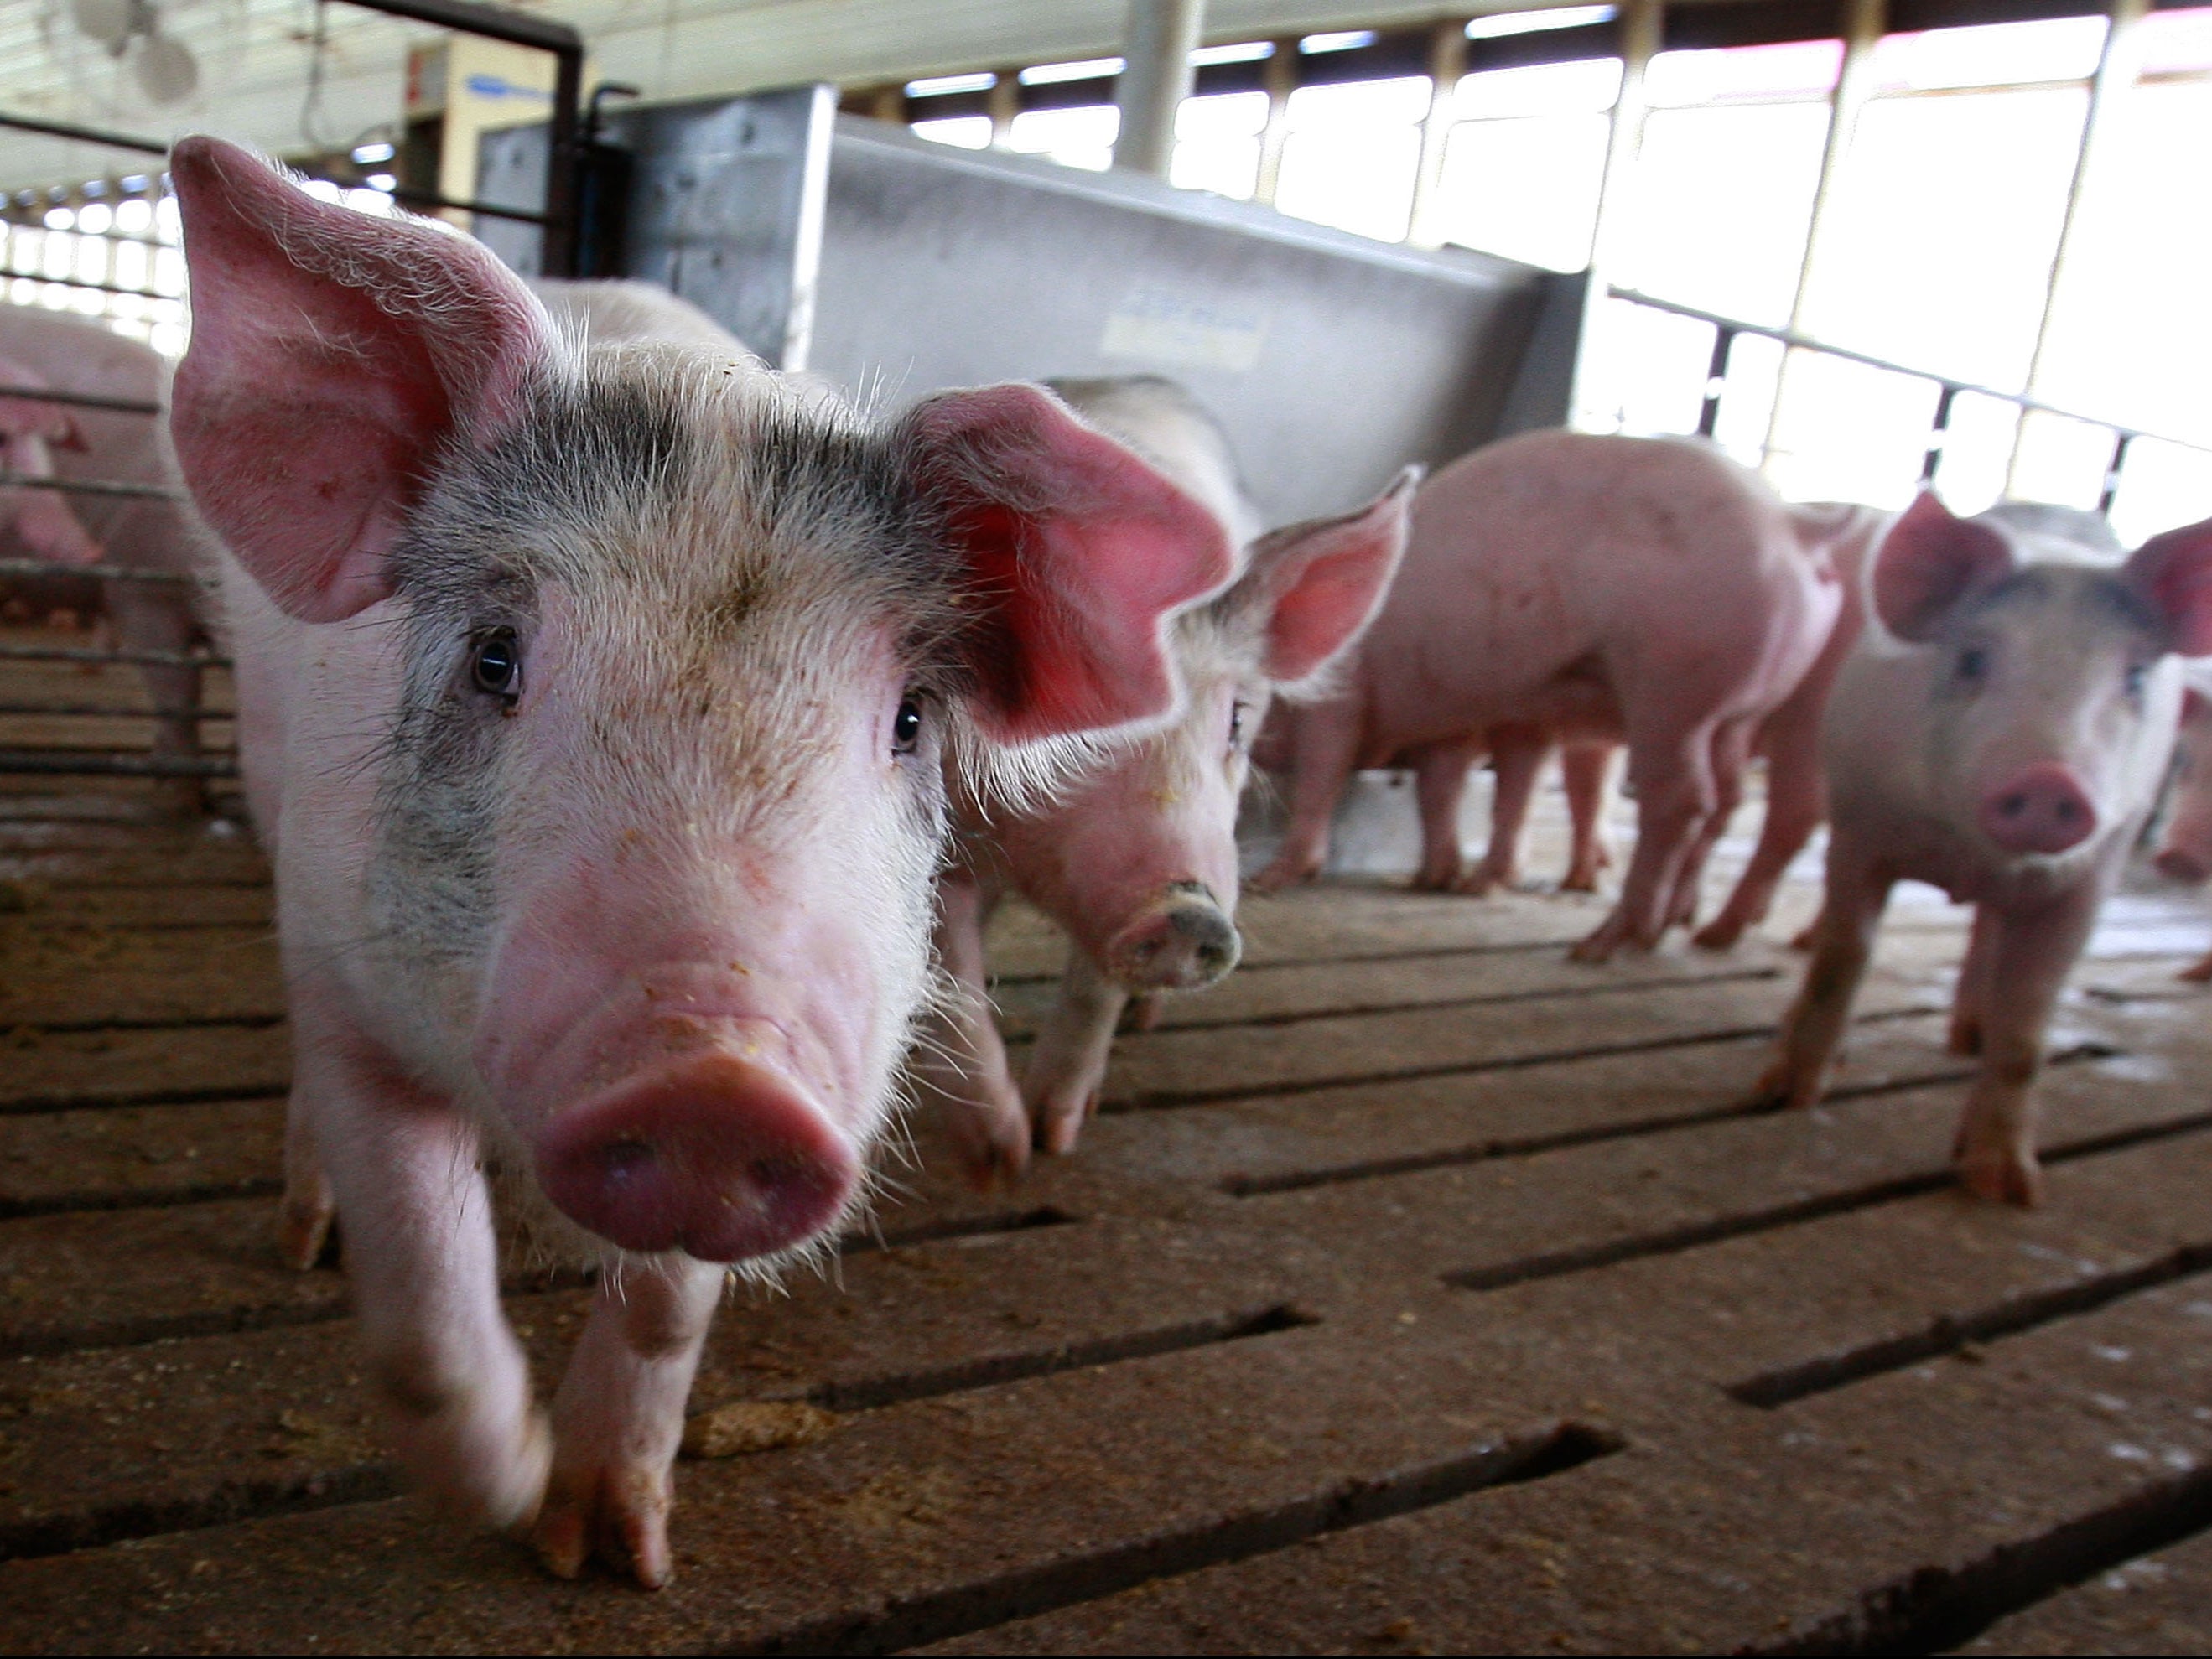 Swine flu in humans is not caused by pigs